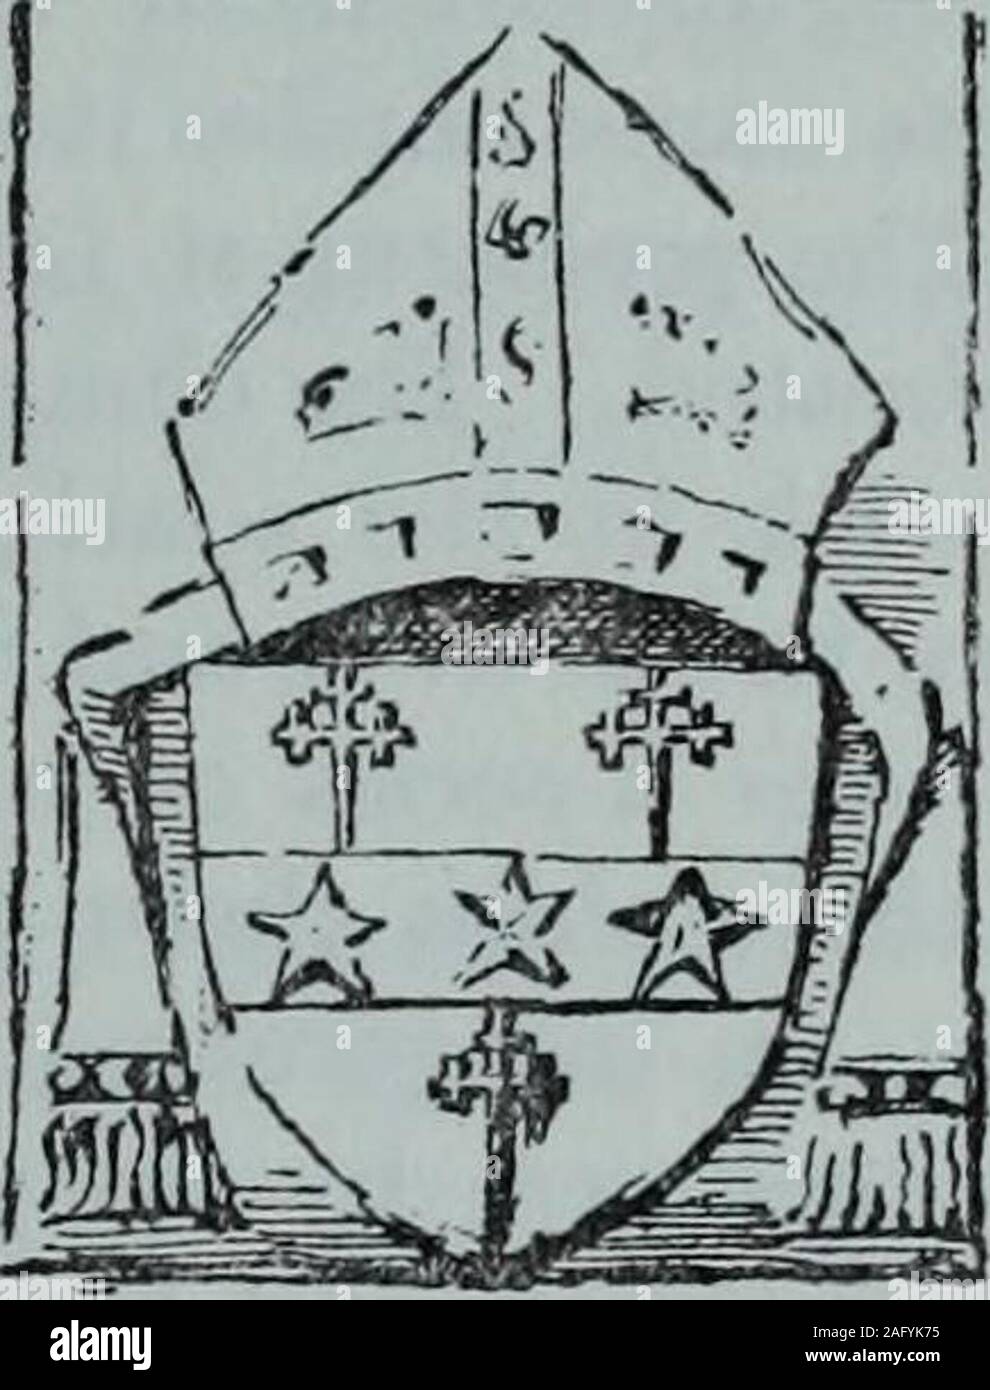 . Elgin past and present : a historical guide / by Herbert B. Mackintosh. t into the ^    .  . Bishops Palace, Elgin, and described atpage 33. The arms on the sinister shield (Fig. 71)are :—A fess chequy between two crownsin chief and a cross crosslet fitchee in base.Above the shield a mitre. These are thearms of Bishop David Stewart, the builderof this tower (see pp. 35, 59). A stone withhis arms is also built into the walls of theBishops Palace at Elgin. On the same wall almost directly overthis group is a single panel just touchingthe corbelhngs at the top. The arms are(Fig. 72) :—On a fess Stock Photo